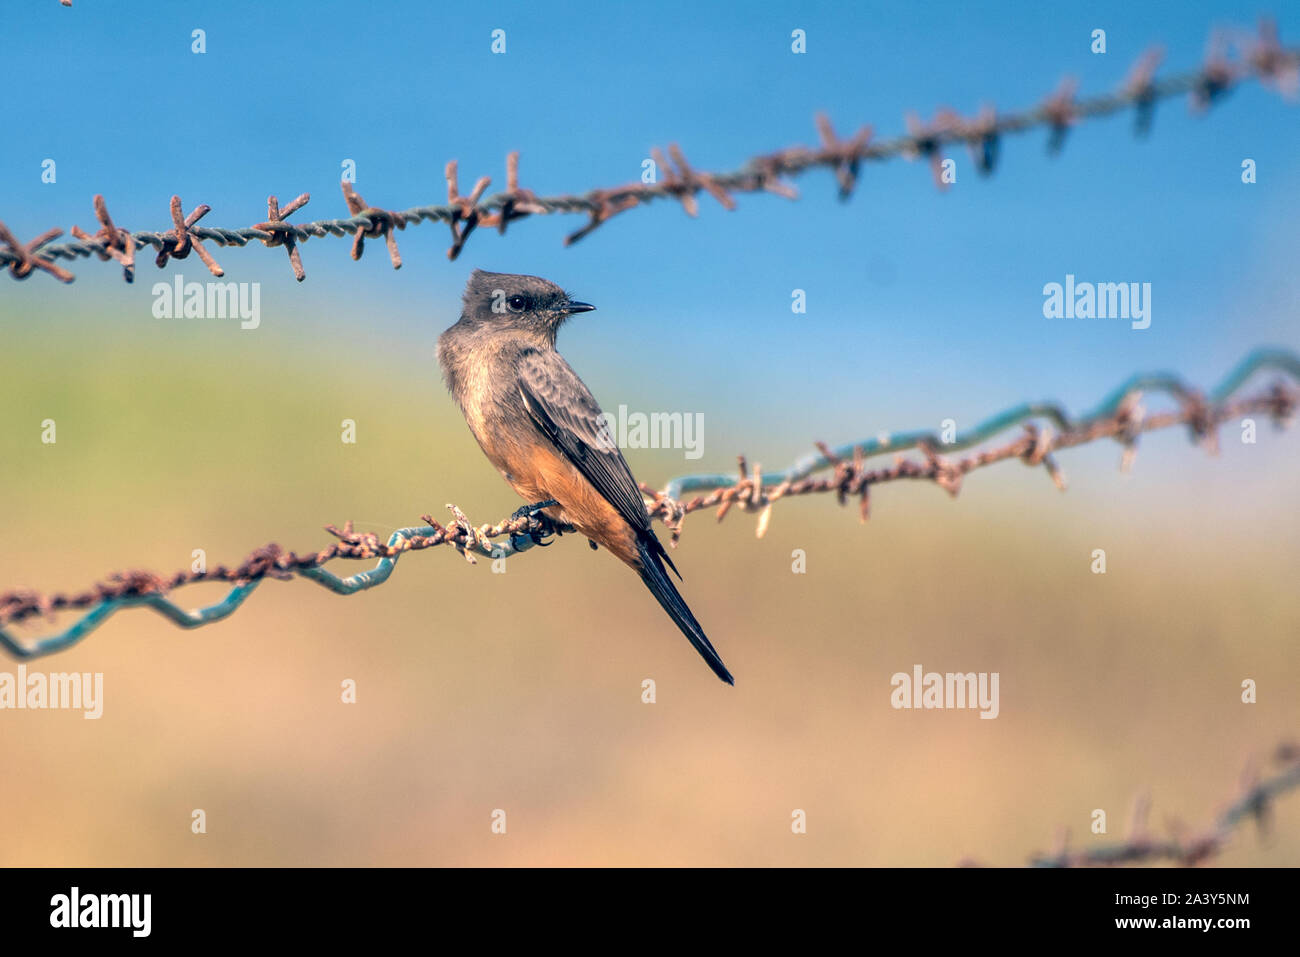 Cute Say's Phoebe bird clinging to sharp barbed wire fencing while looking over shoulder to right. Stock Photo